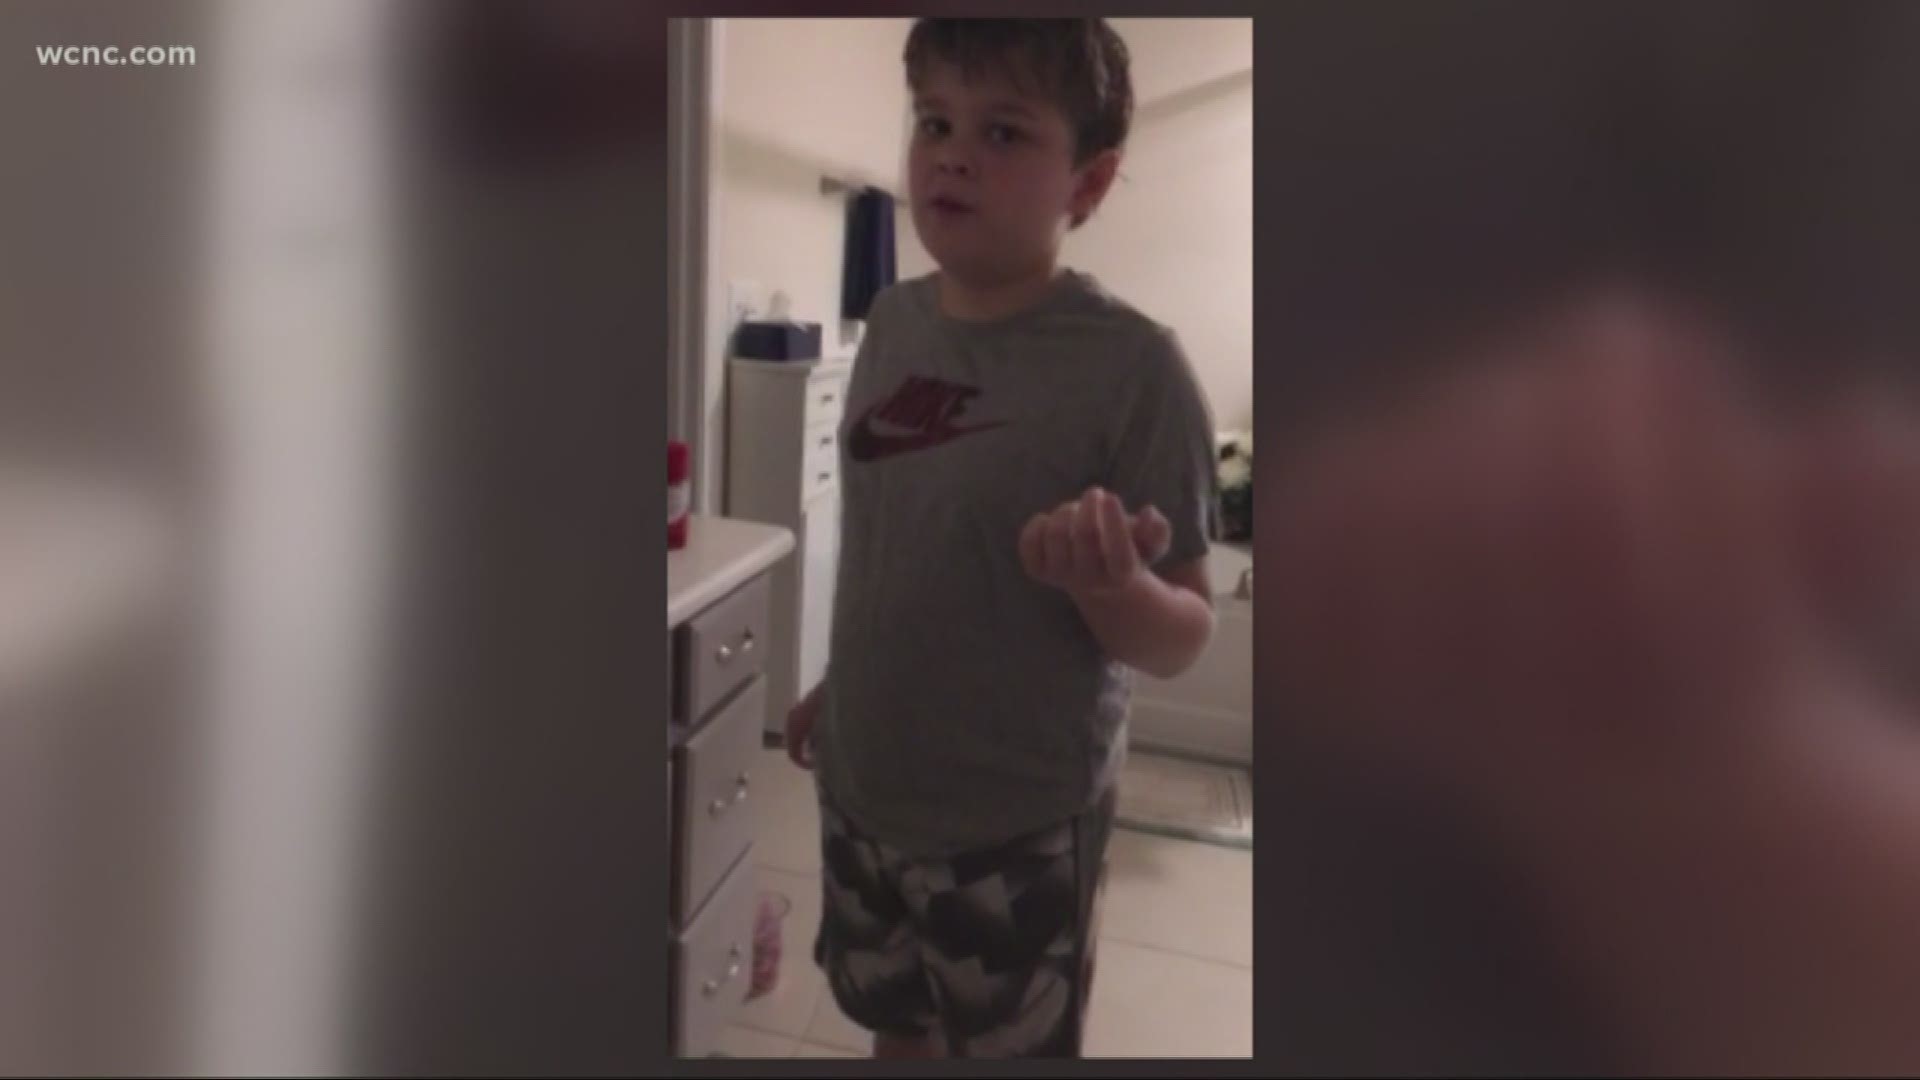 Dealing with the seriousness of the coronavirus pandemic is no laughing matter. But one local mom pulled the perfect April Fools' Day prank on her son.